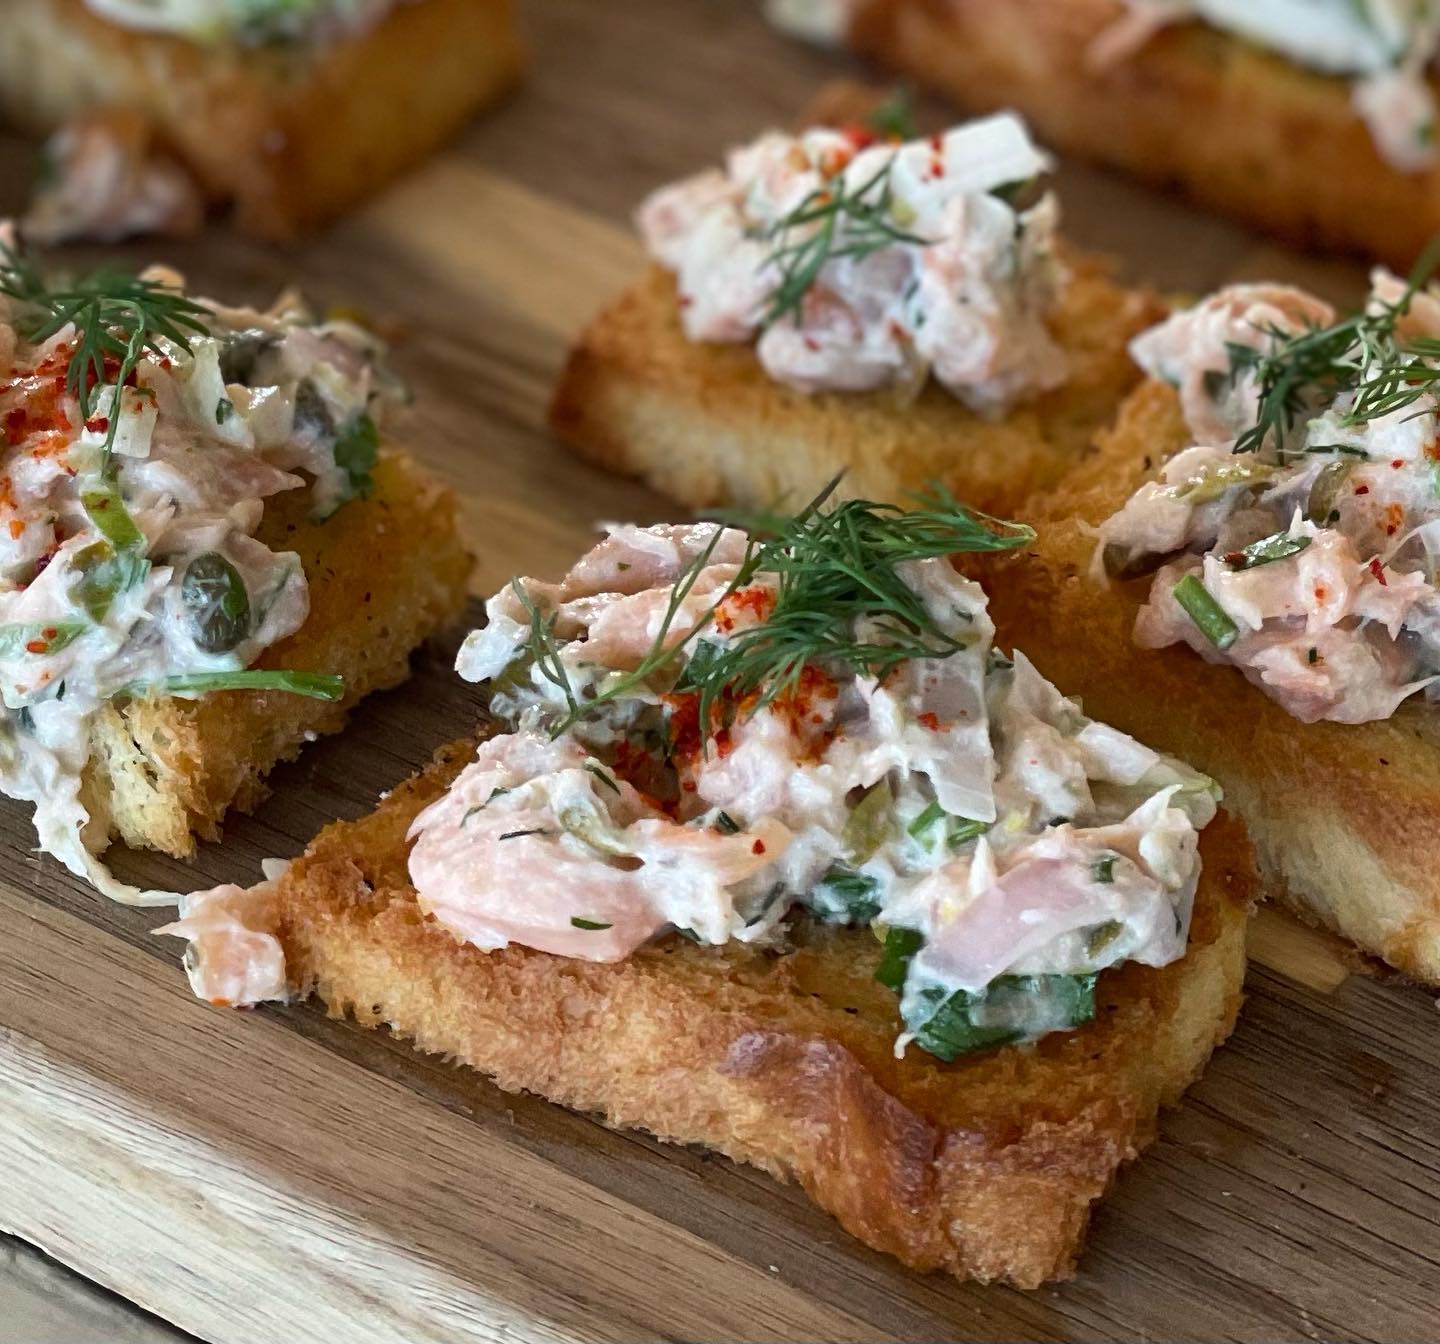 What did YOU have for lunch today? Salmon Rillettes from our French menu. *chef’s kiss*